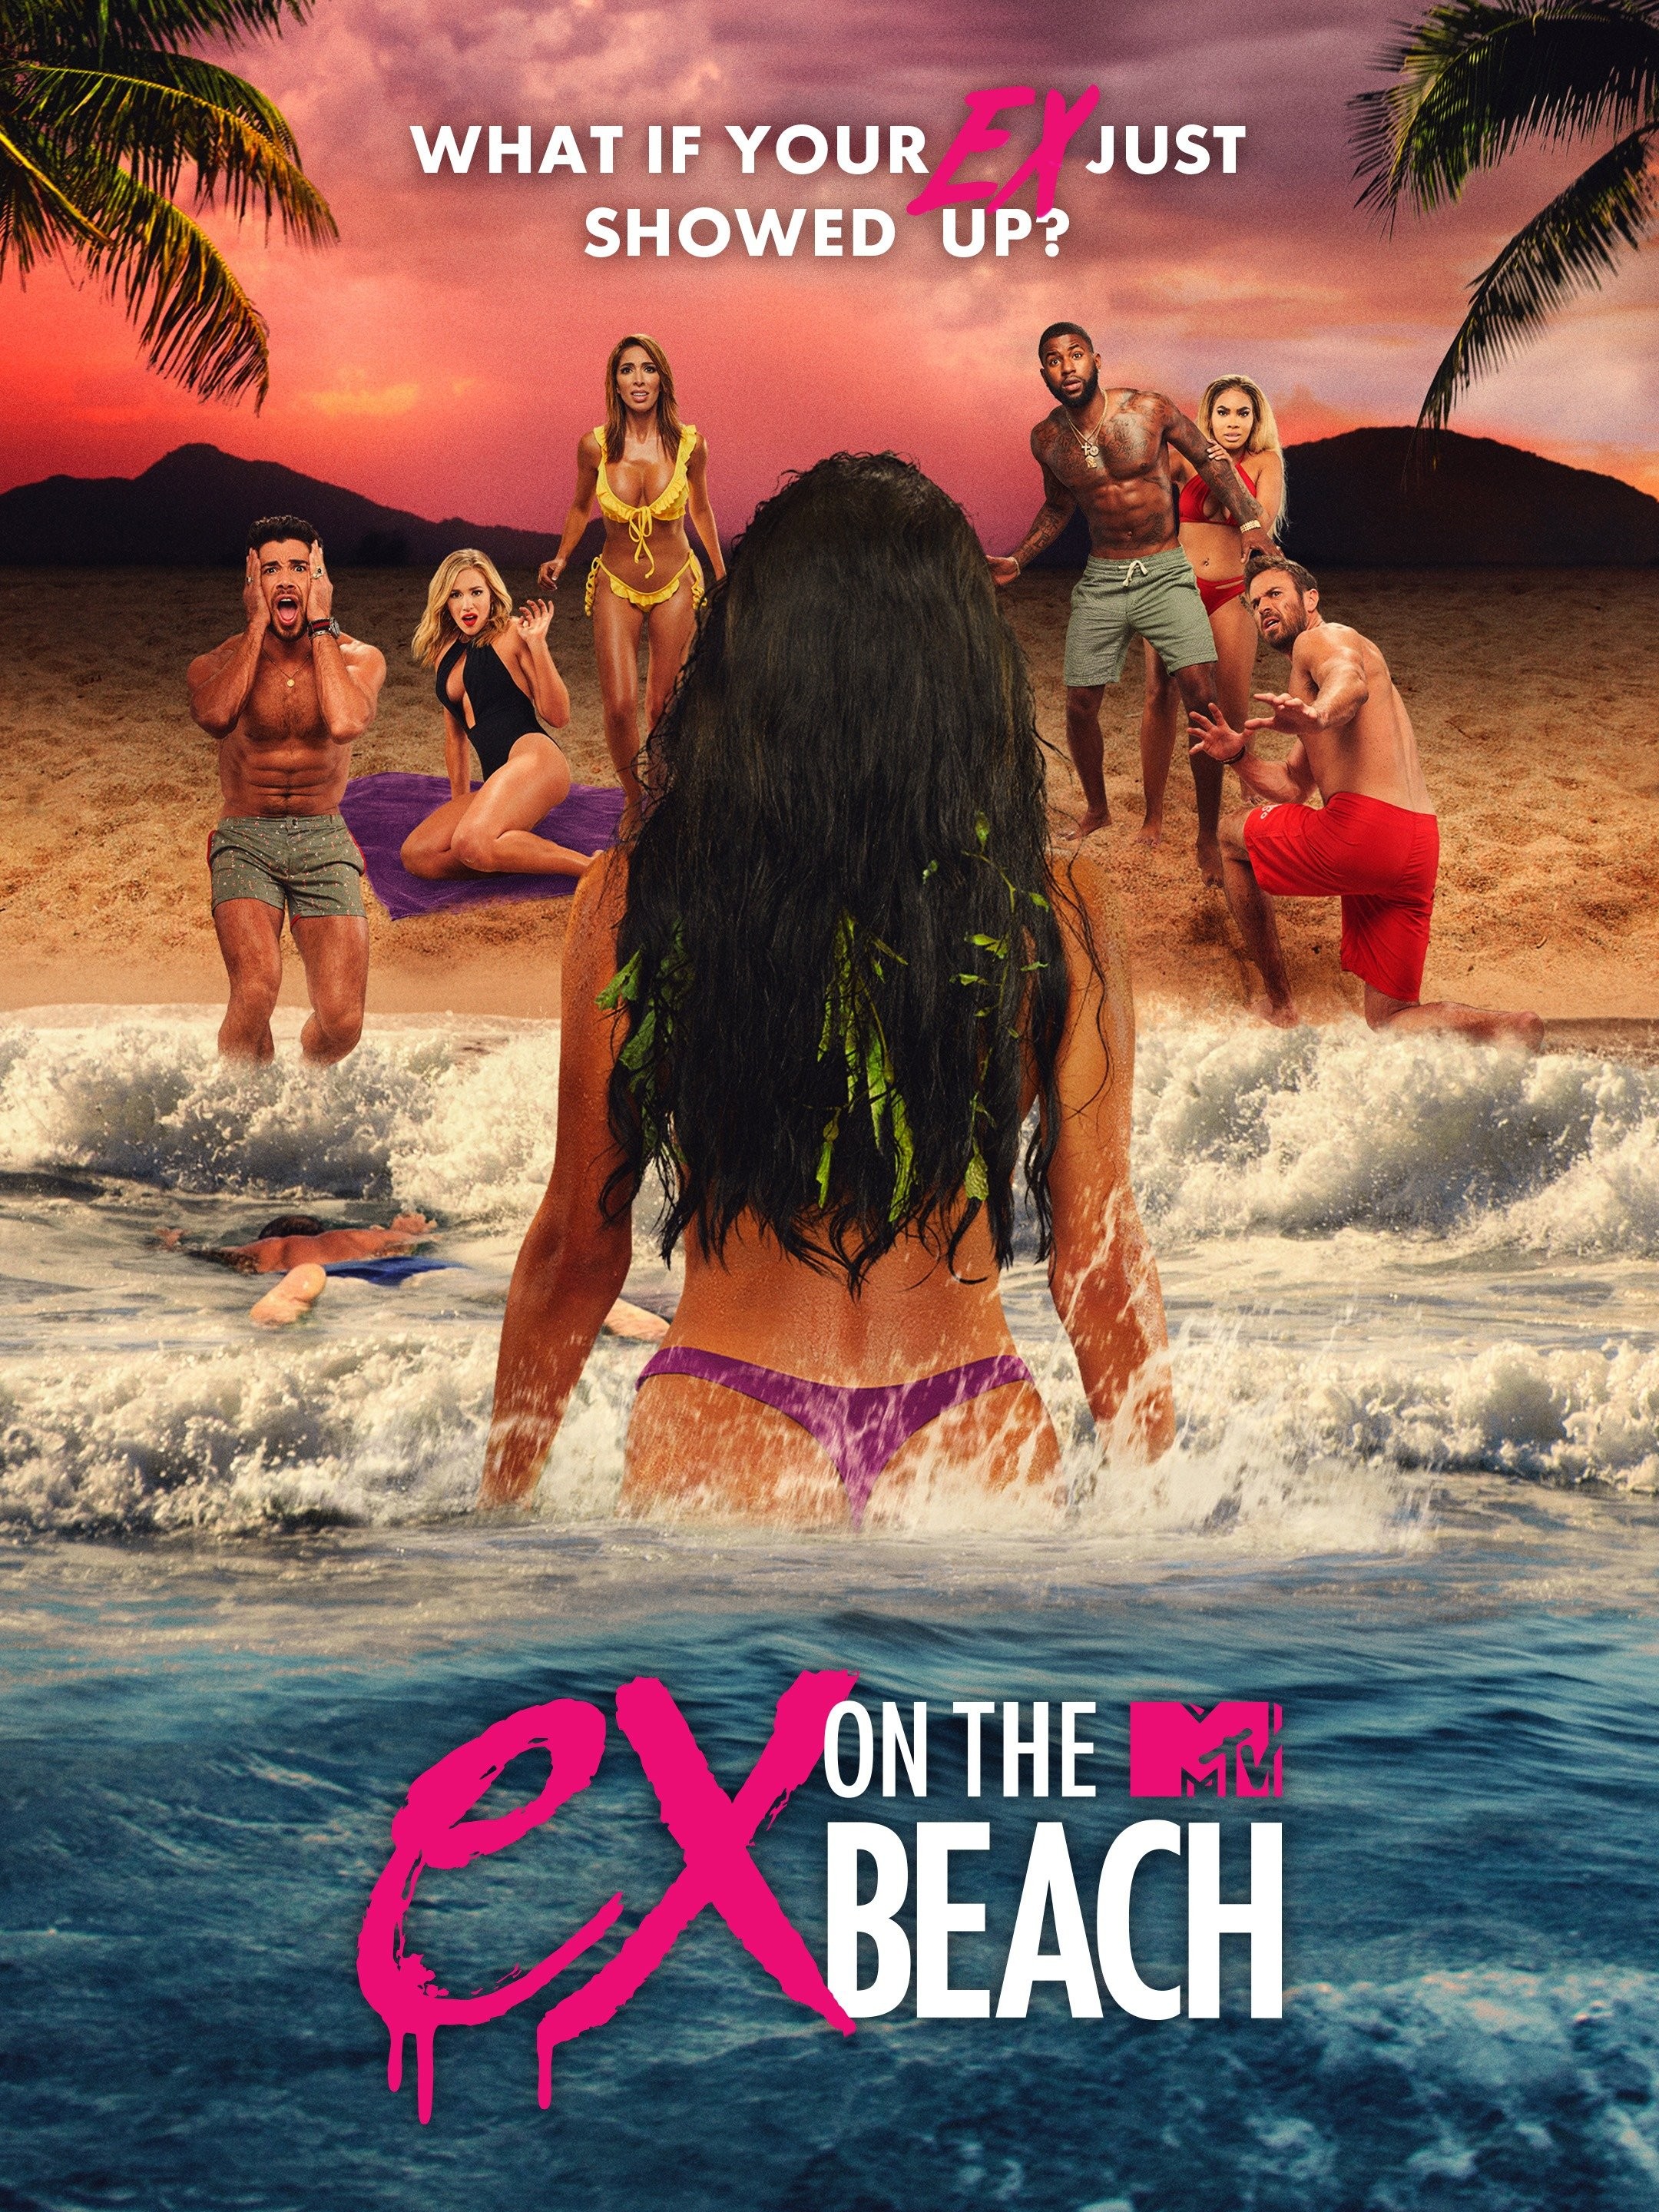 alexander jacob rogers recommends Ex On The Beach Season 2